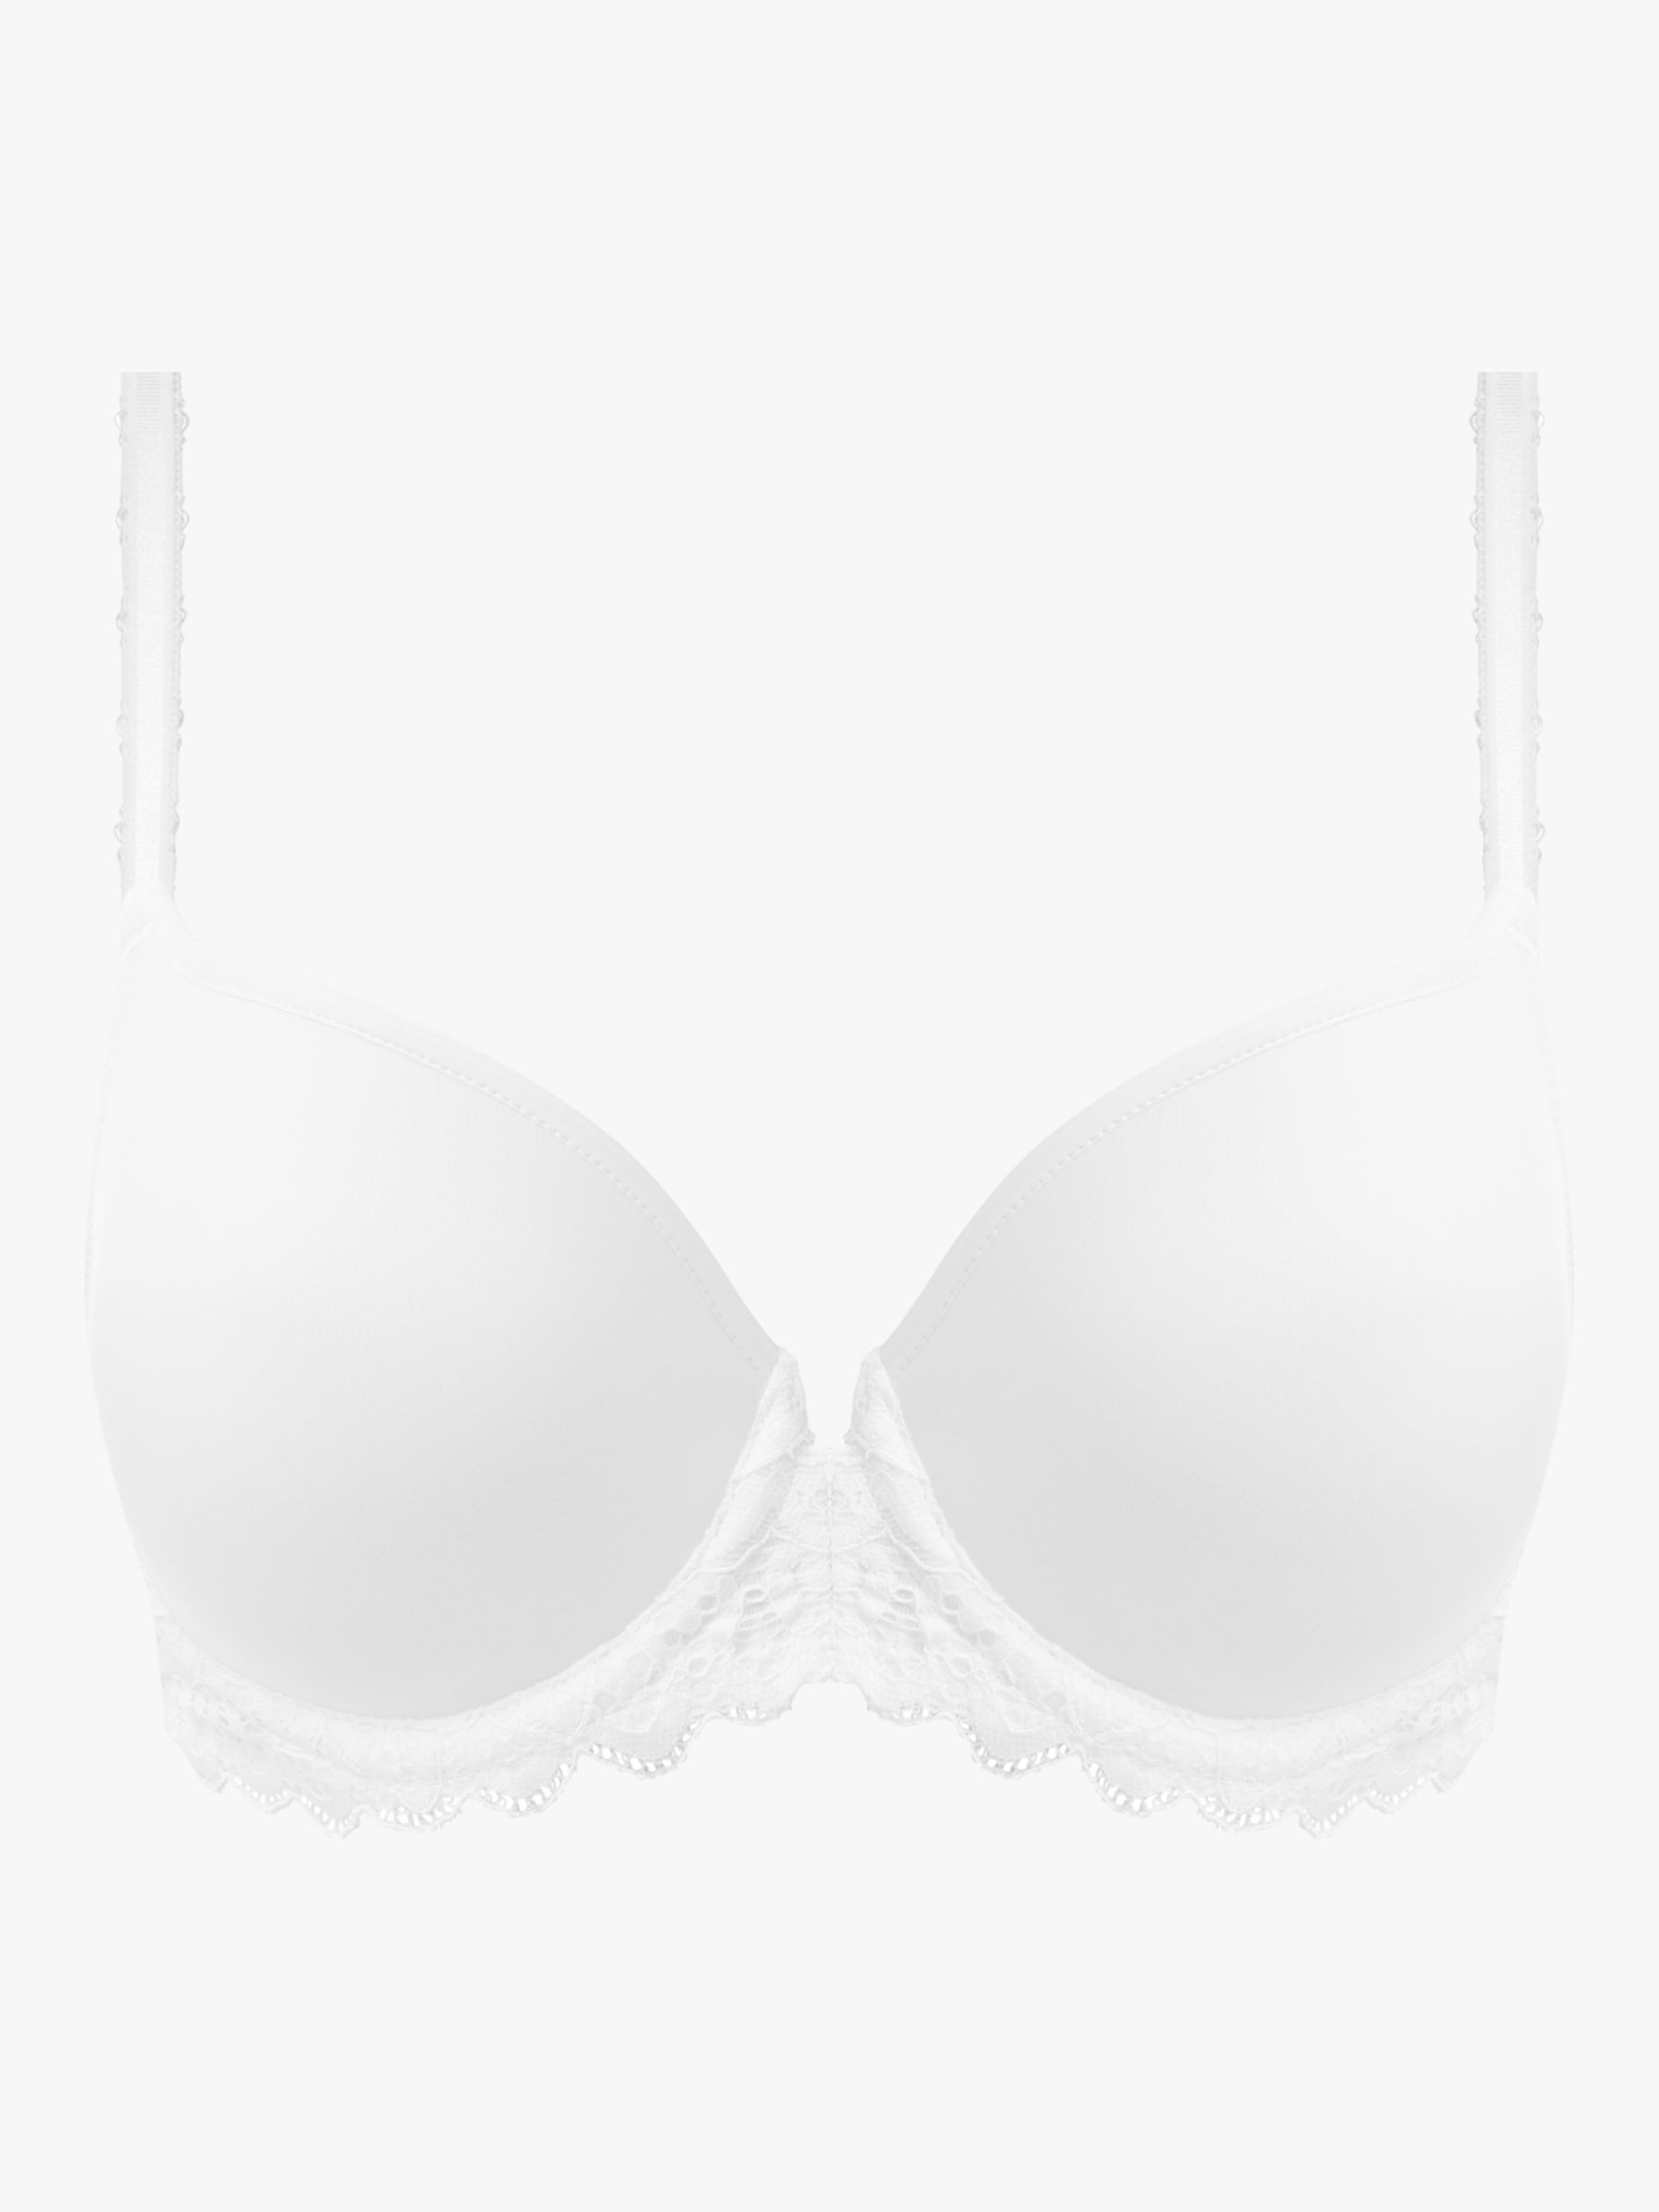 Buy Wacoal Raffiné Underwired Contour Bra Online at johnlewis.com